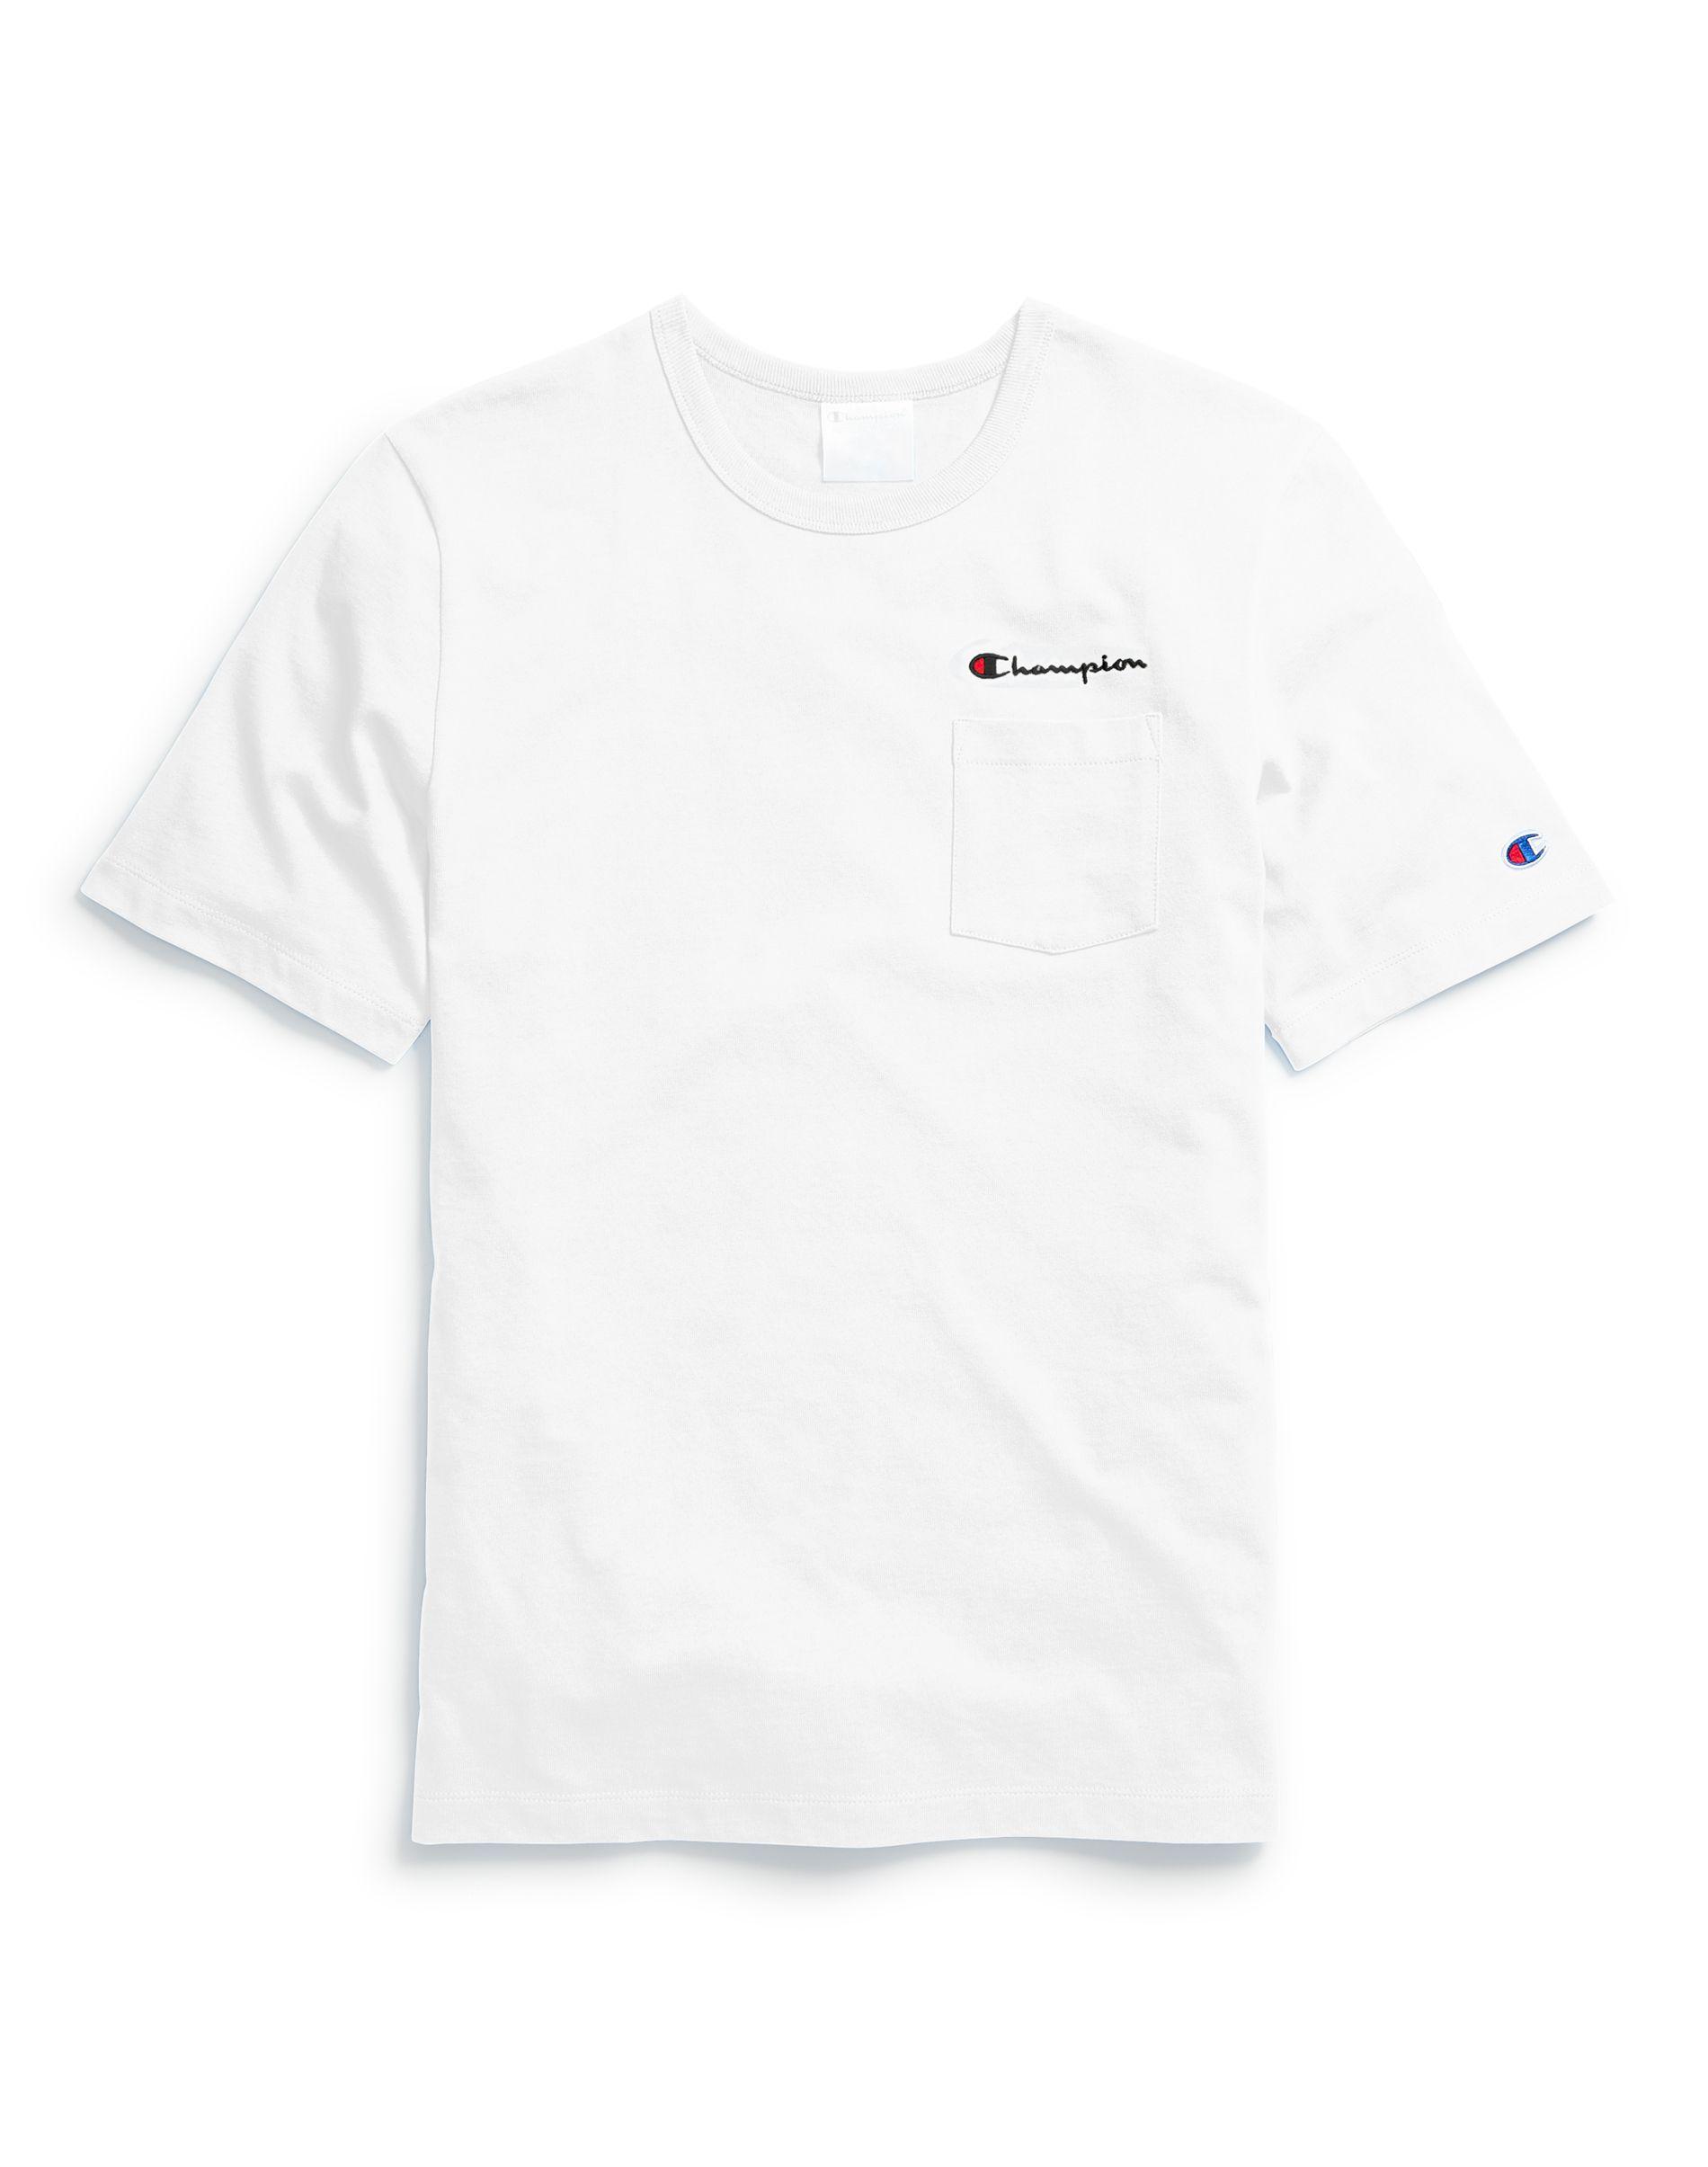 Champion Cotton Life® Pocket Tee in White for Men - Lyst